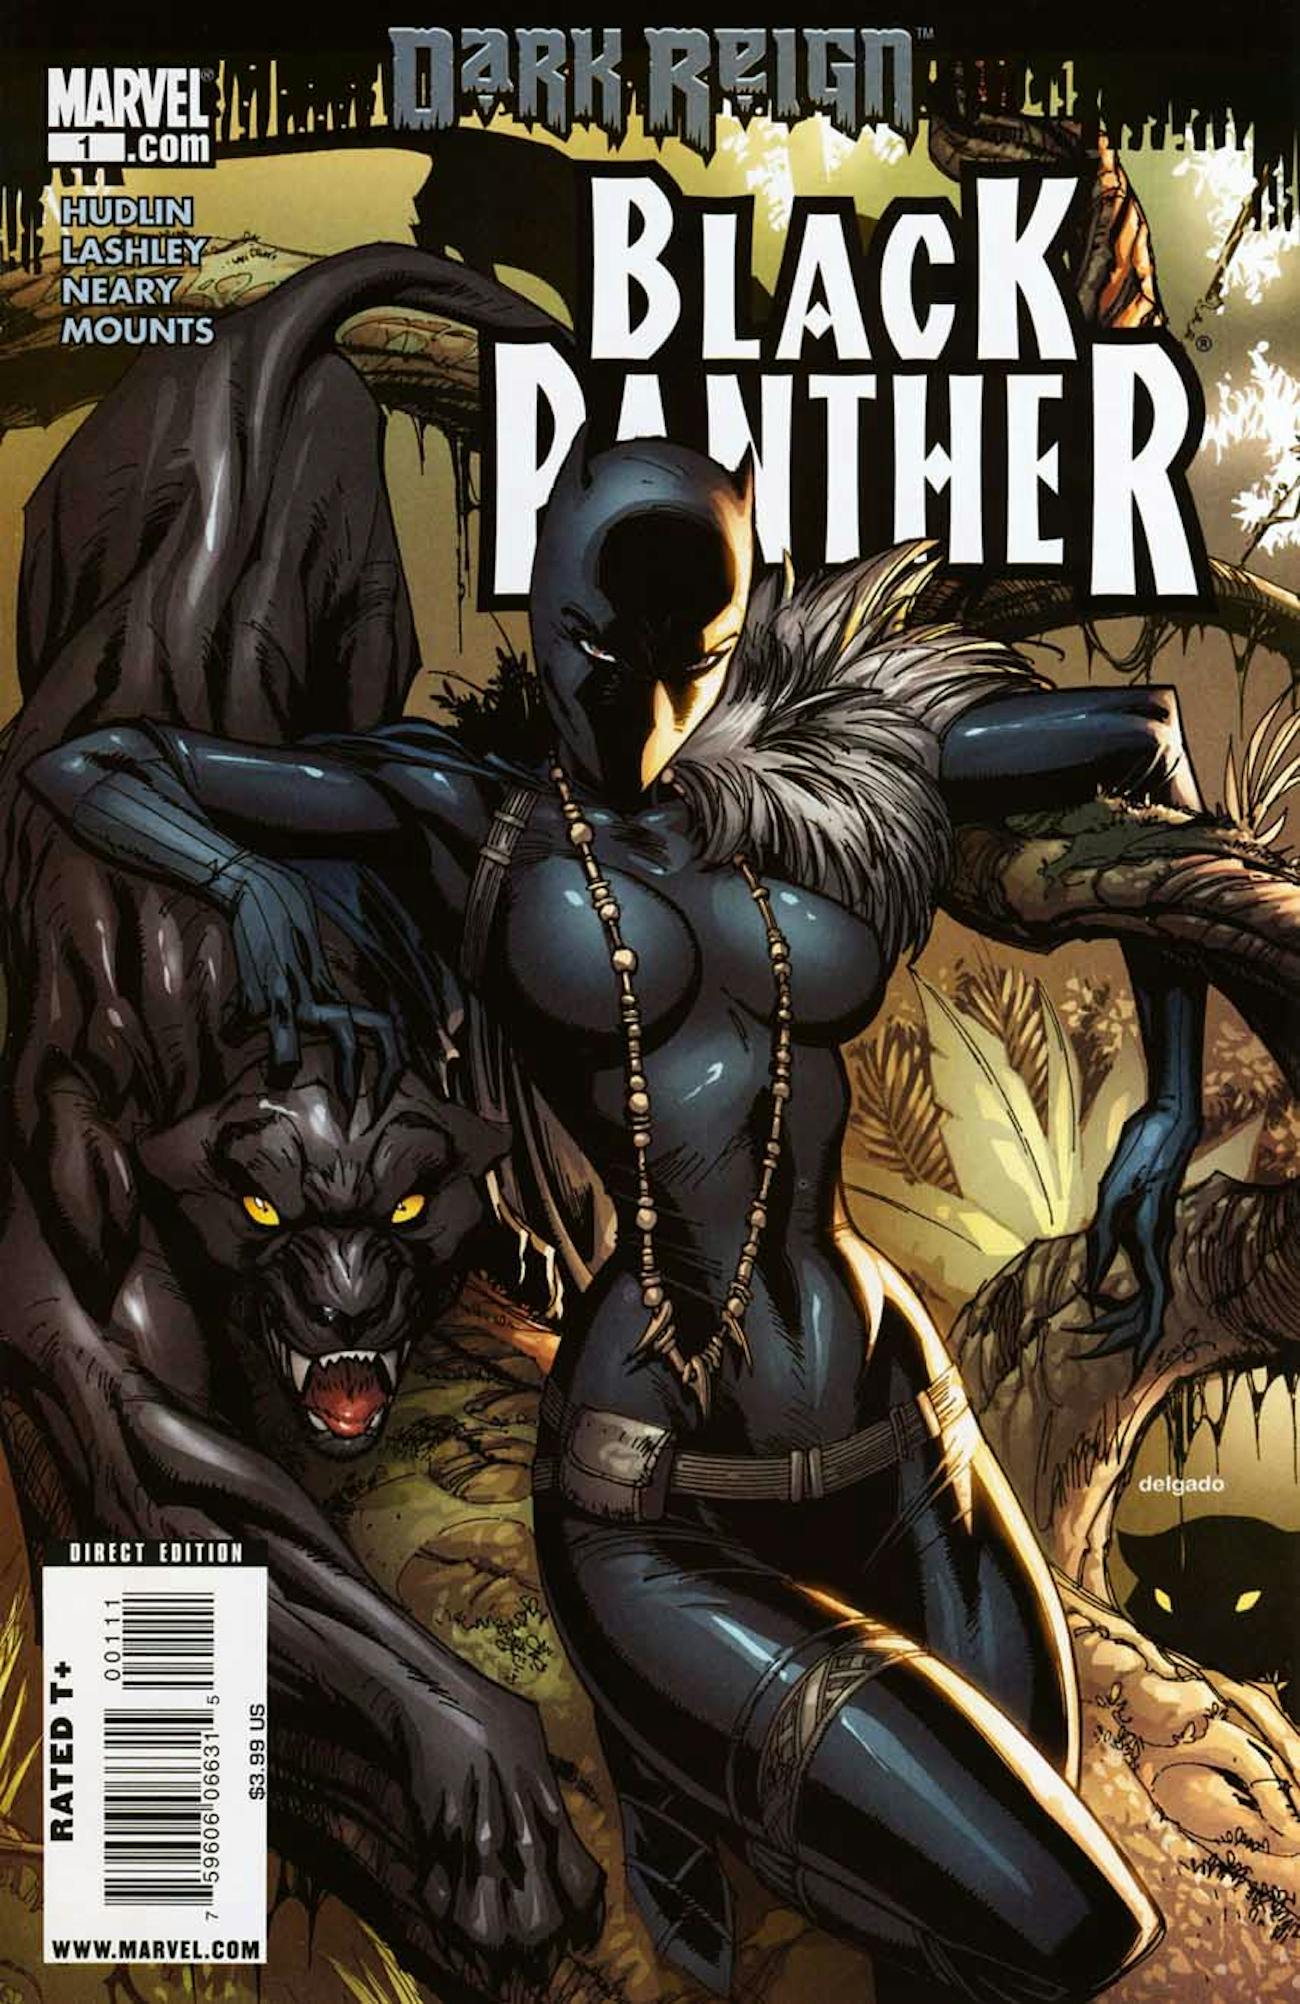 A Second Black Panther Suit Could Mean Big Things For